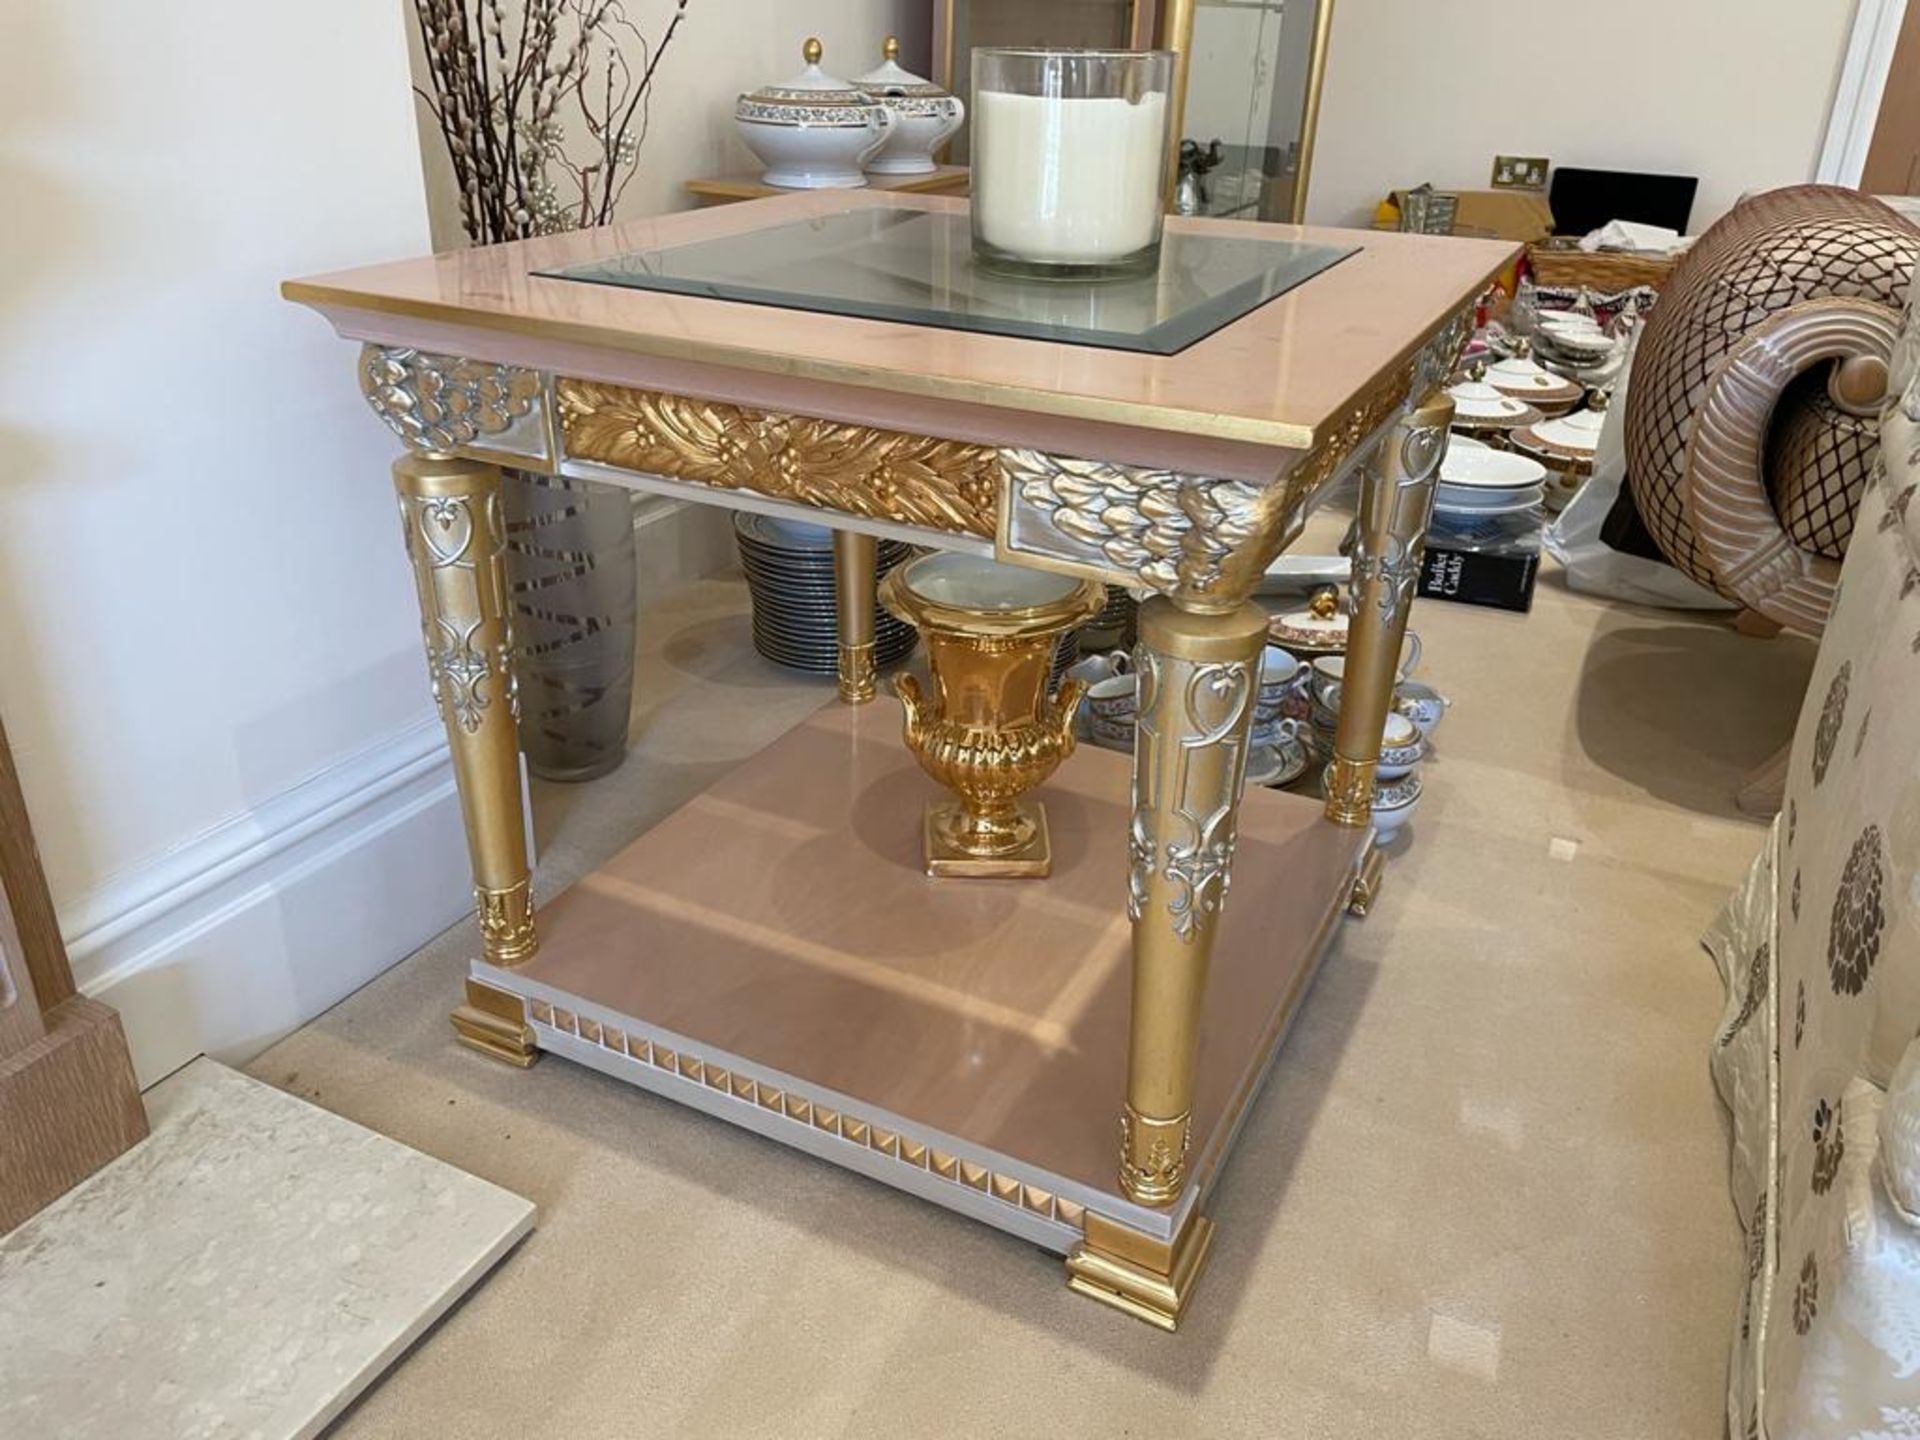 2 x Hand Carved Ornate Side Tables Complimented With Birchwood Veneer, Golden Pillar Legs, Carved - Image 11 of 13